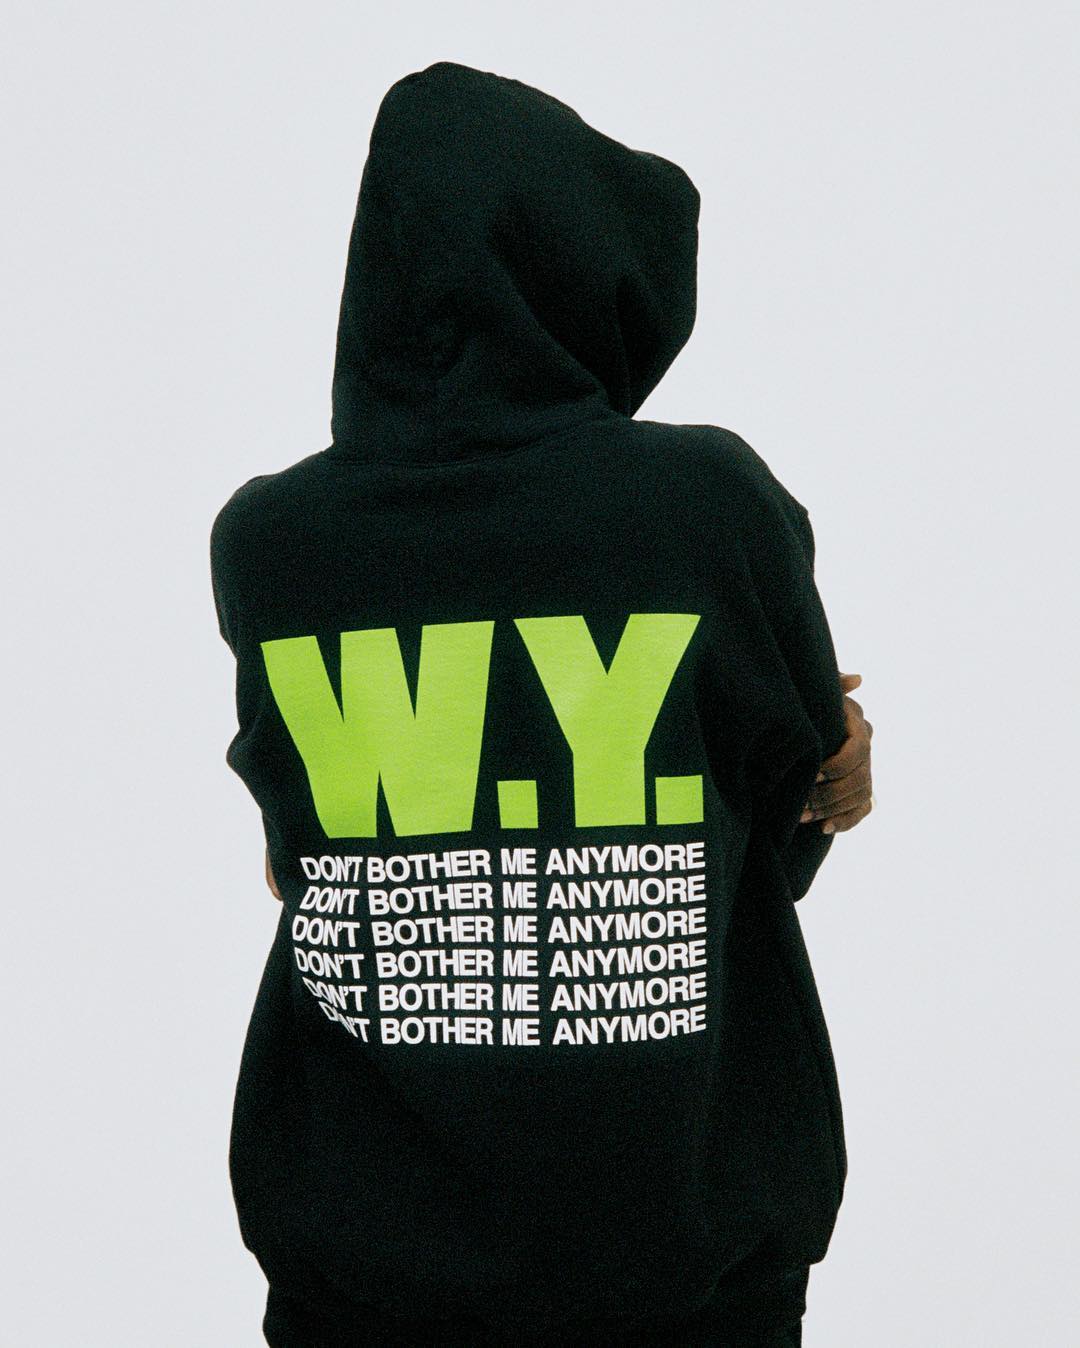 UNION WASTED YOUTH HOODIE コラボ